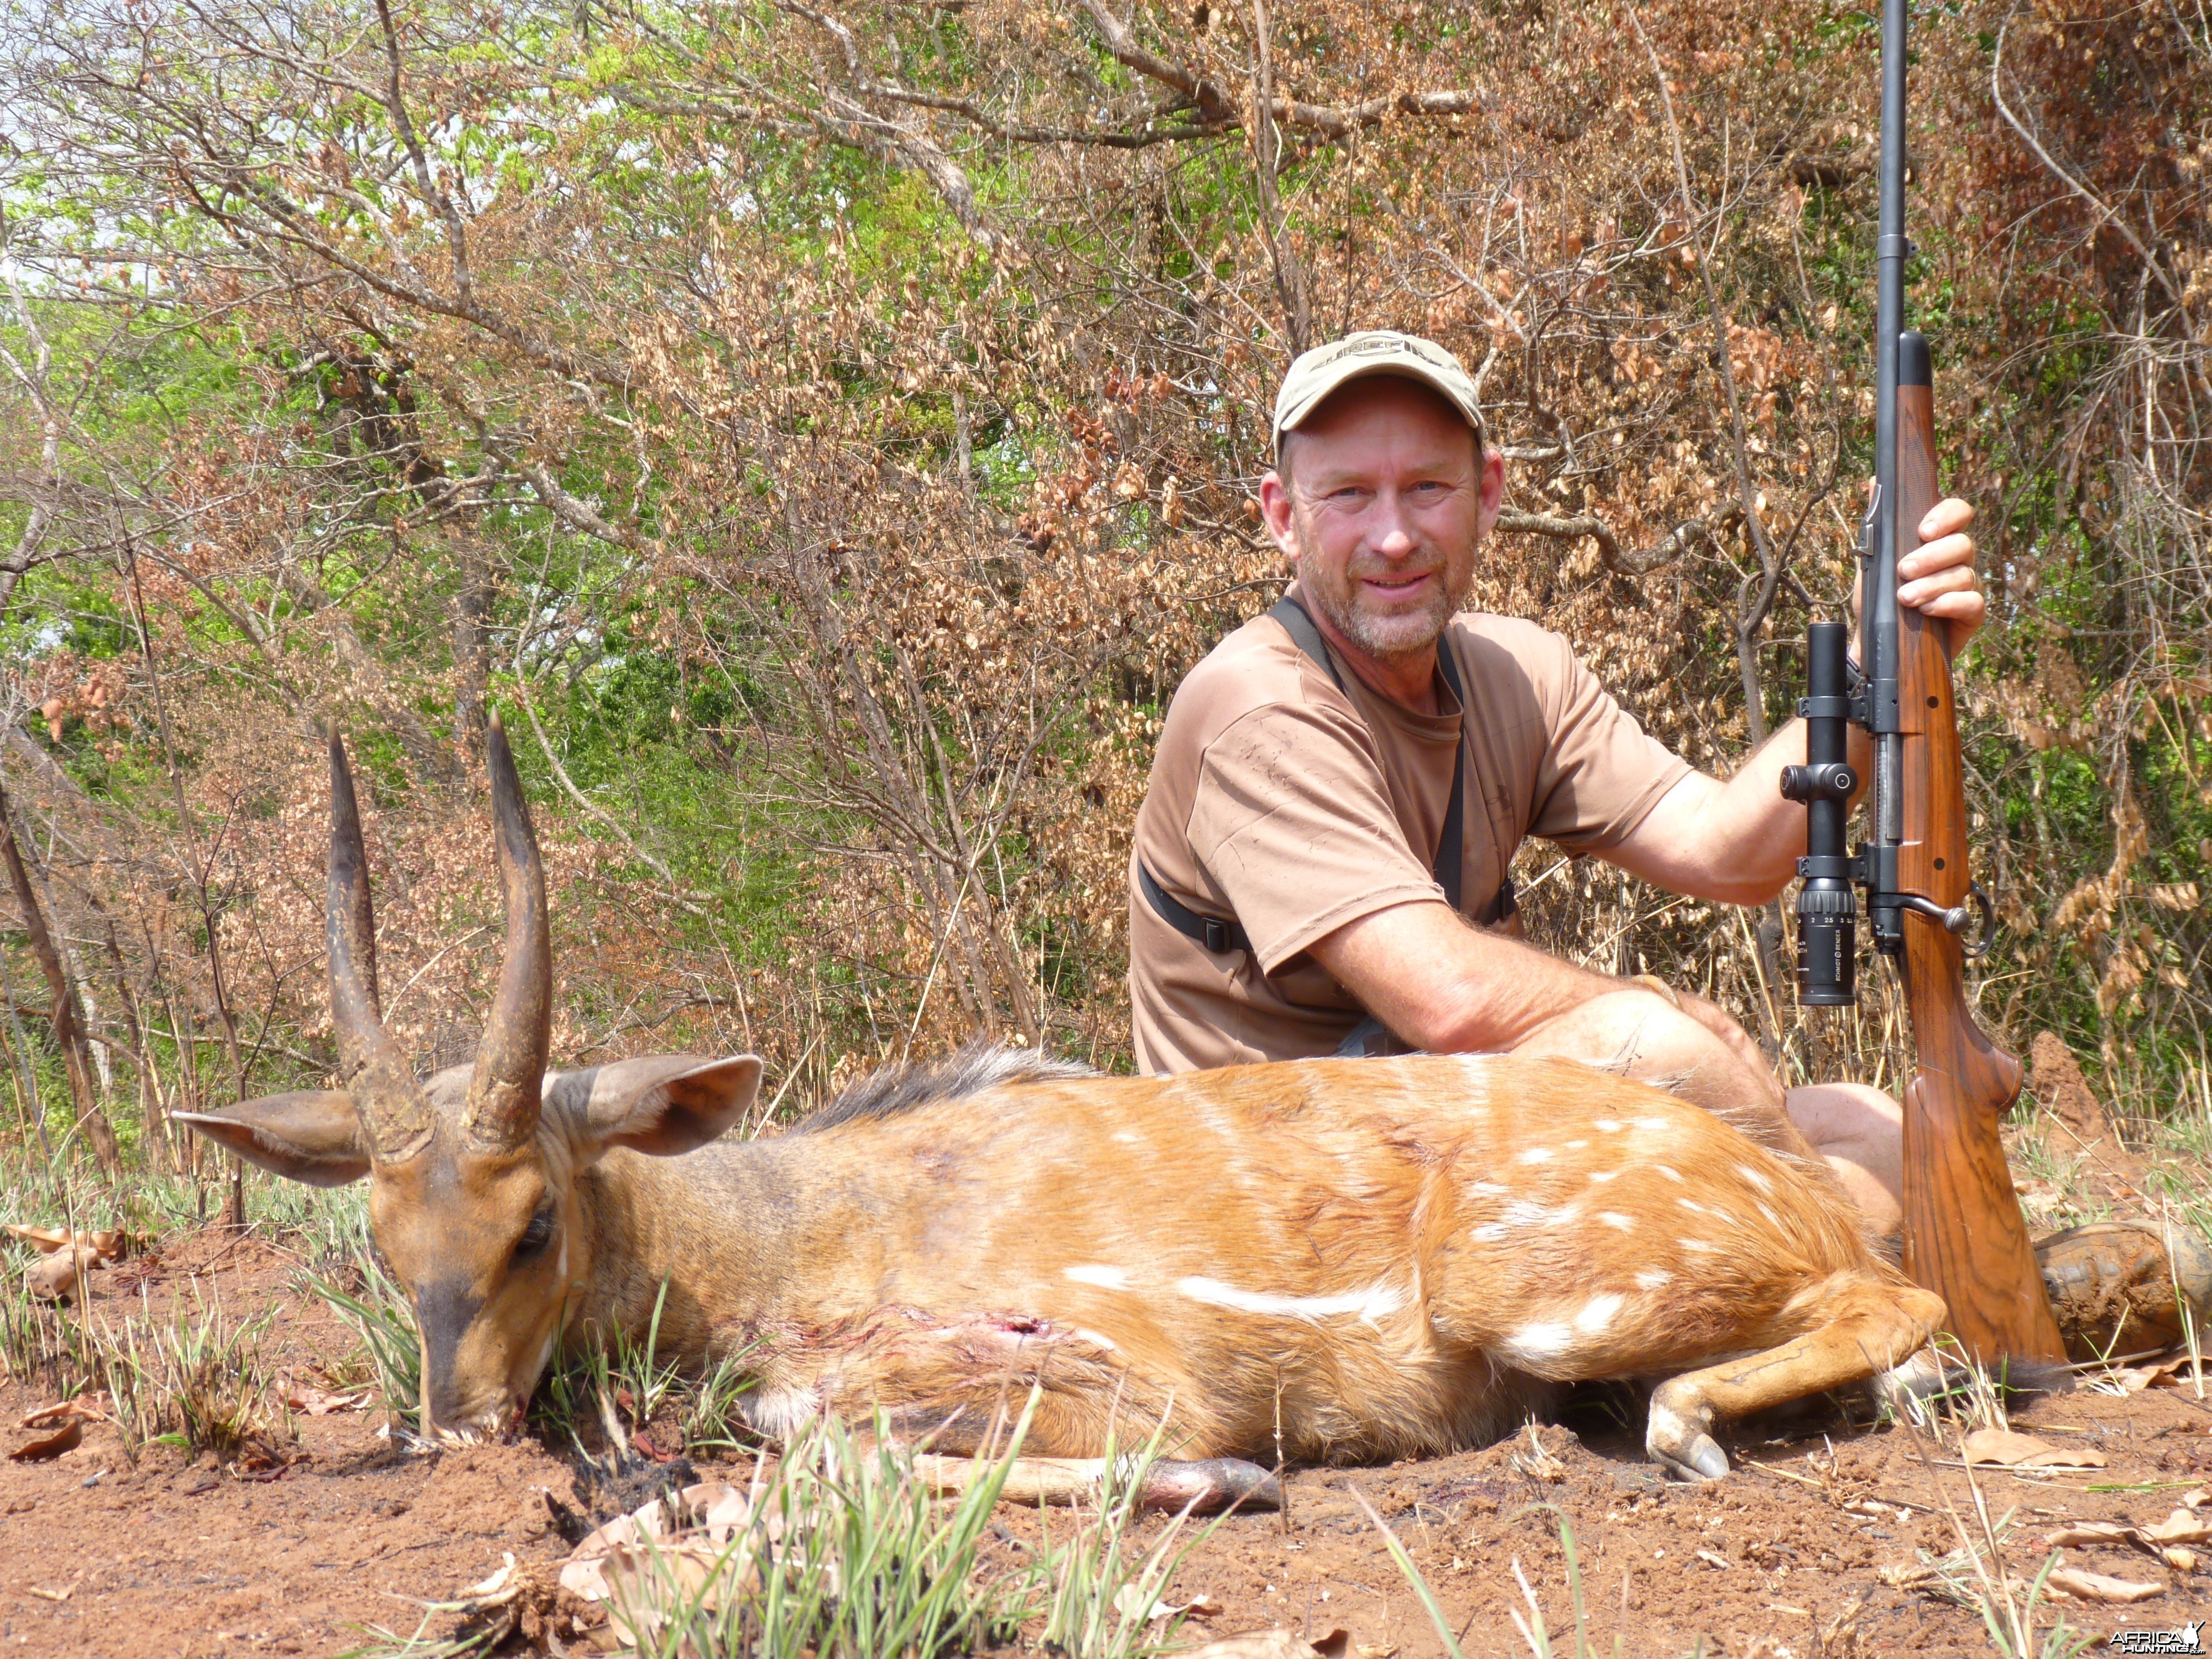 Bushbuck hunted in CAR with Central African Wildlife Adventures